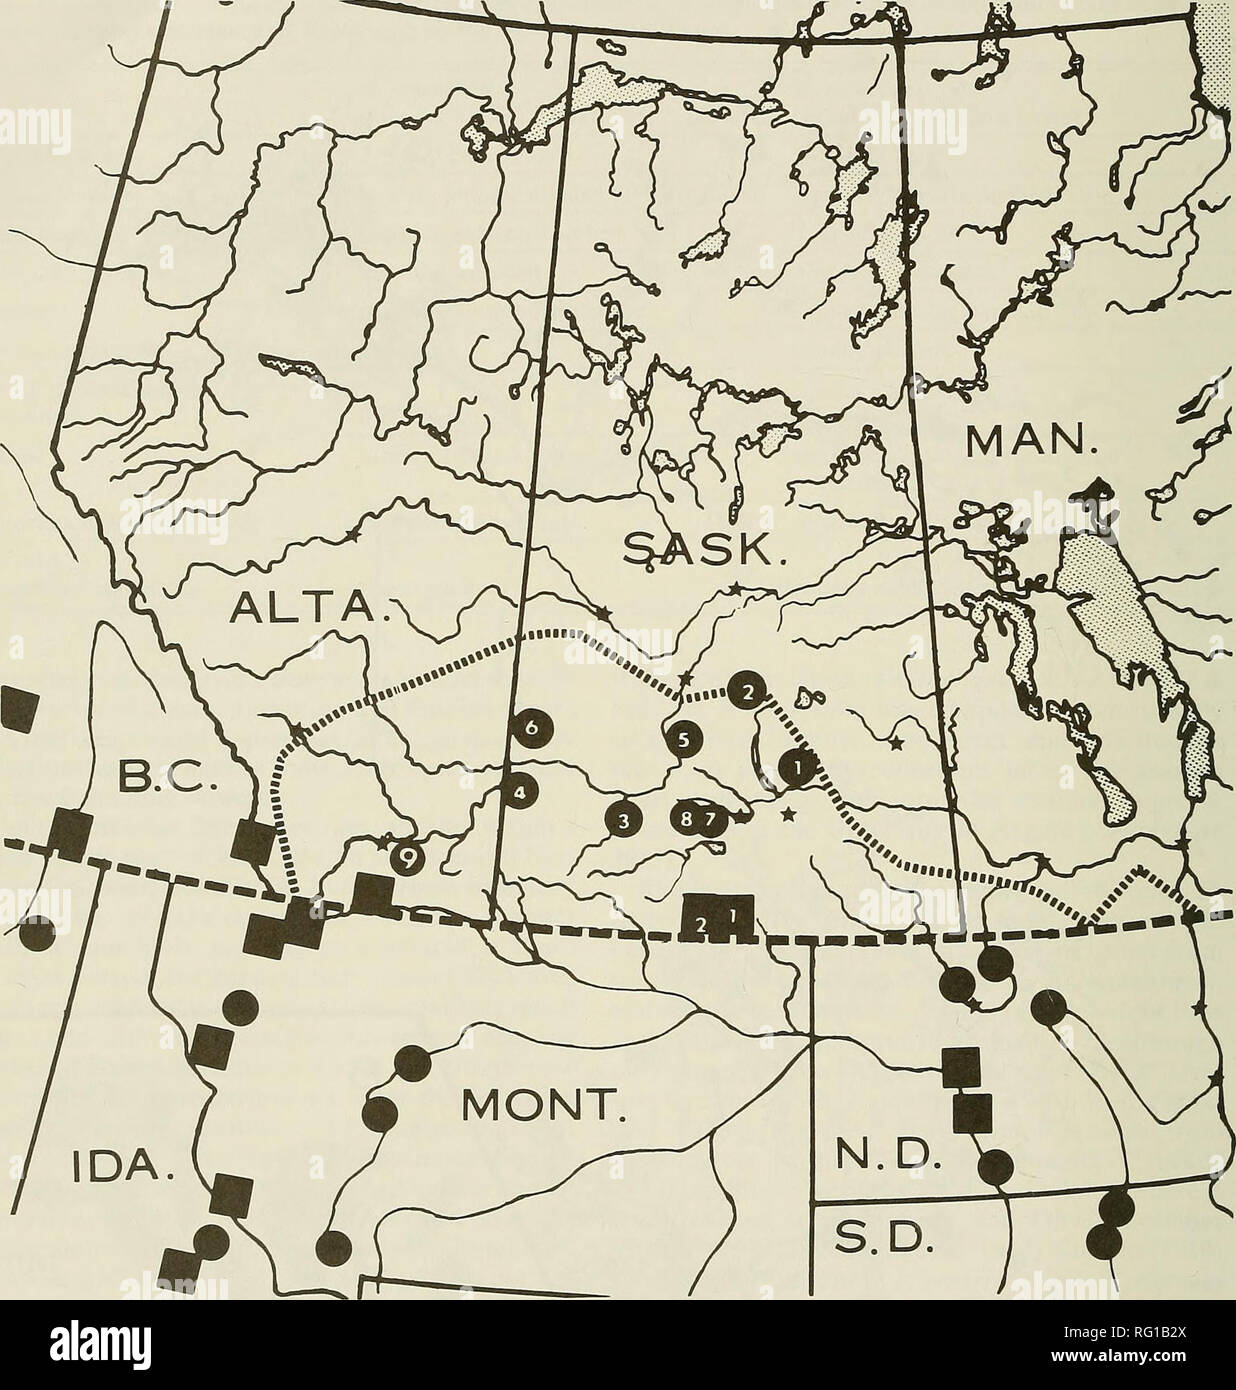 . The Canadian field-naturalist. 48 The Canadian Field-Naturalist Vol. 100. Figure 2. The newly reported Saskatchewan and Alberta localities for Rorippa truncata (= numbered circles) and R. tenerrima (- numbered squares), plus localities in adjacent provinces and states from previous literature reports of R. truncata (- solid circles) and R. tenerrima {= solid squares). The numbers of the Saskatchewan localities are those used in the text in reference to each. The dotted line indicates the approximate border in Canada between true grasslands and aspen parklands.. Please note that these images  Stock Photo